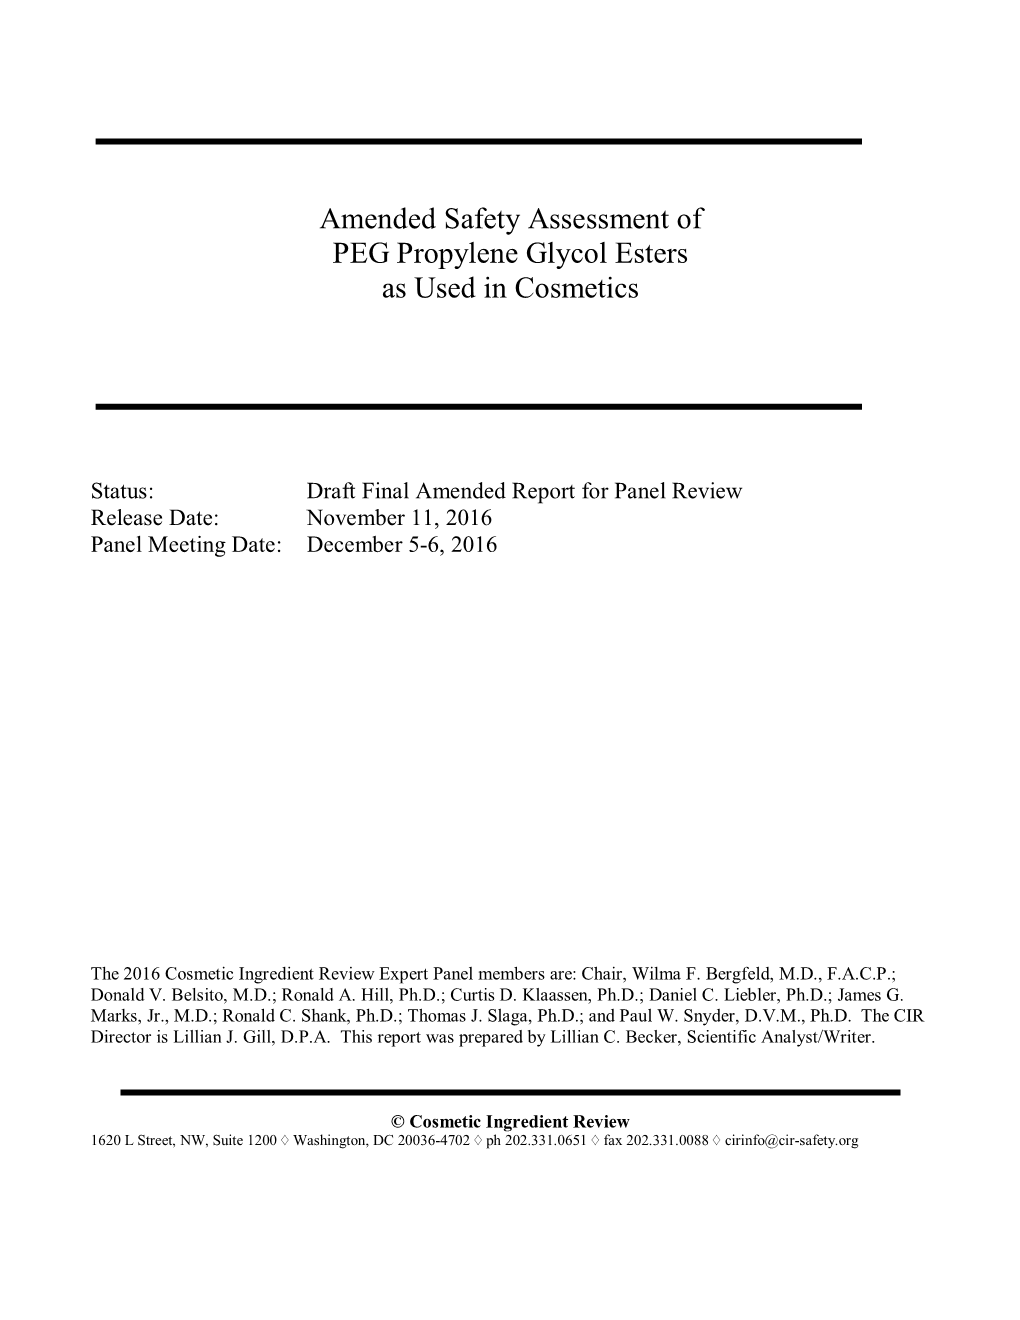 Amended Safety Assessment of PEG Propylene Glycol Esters As Used in Cosmetics